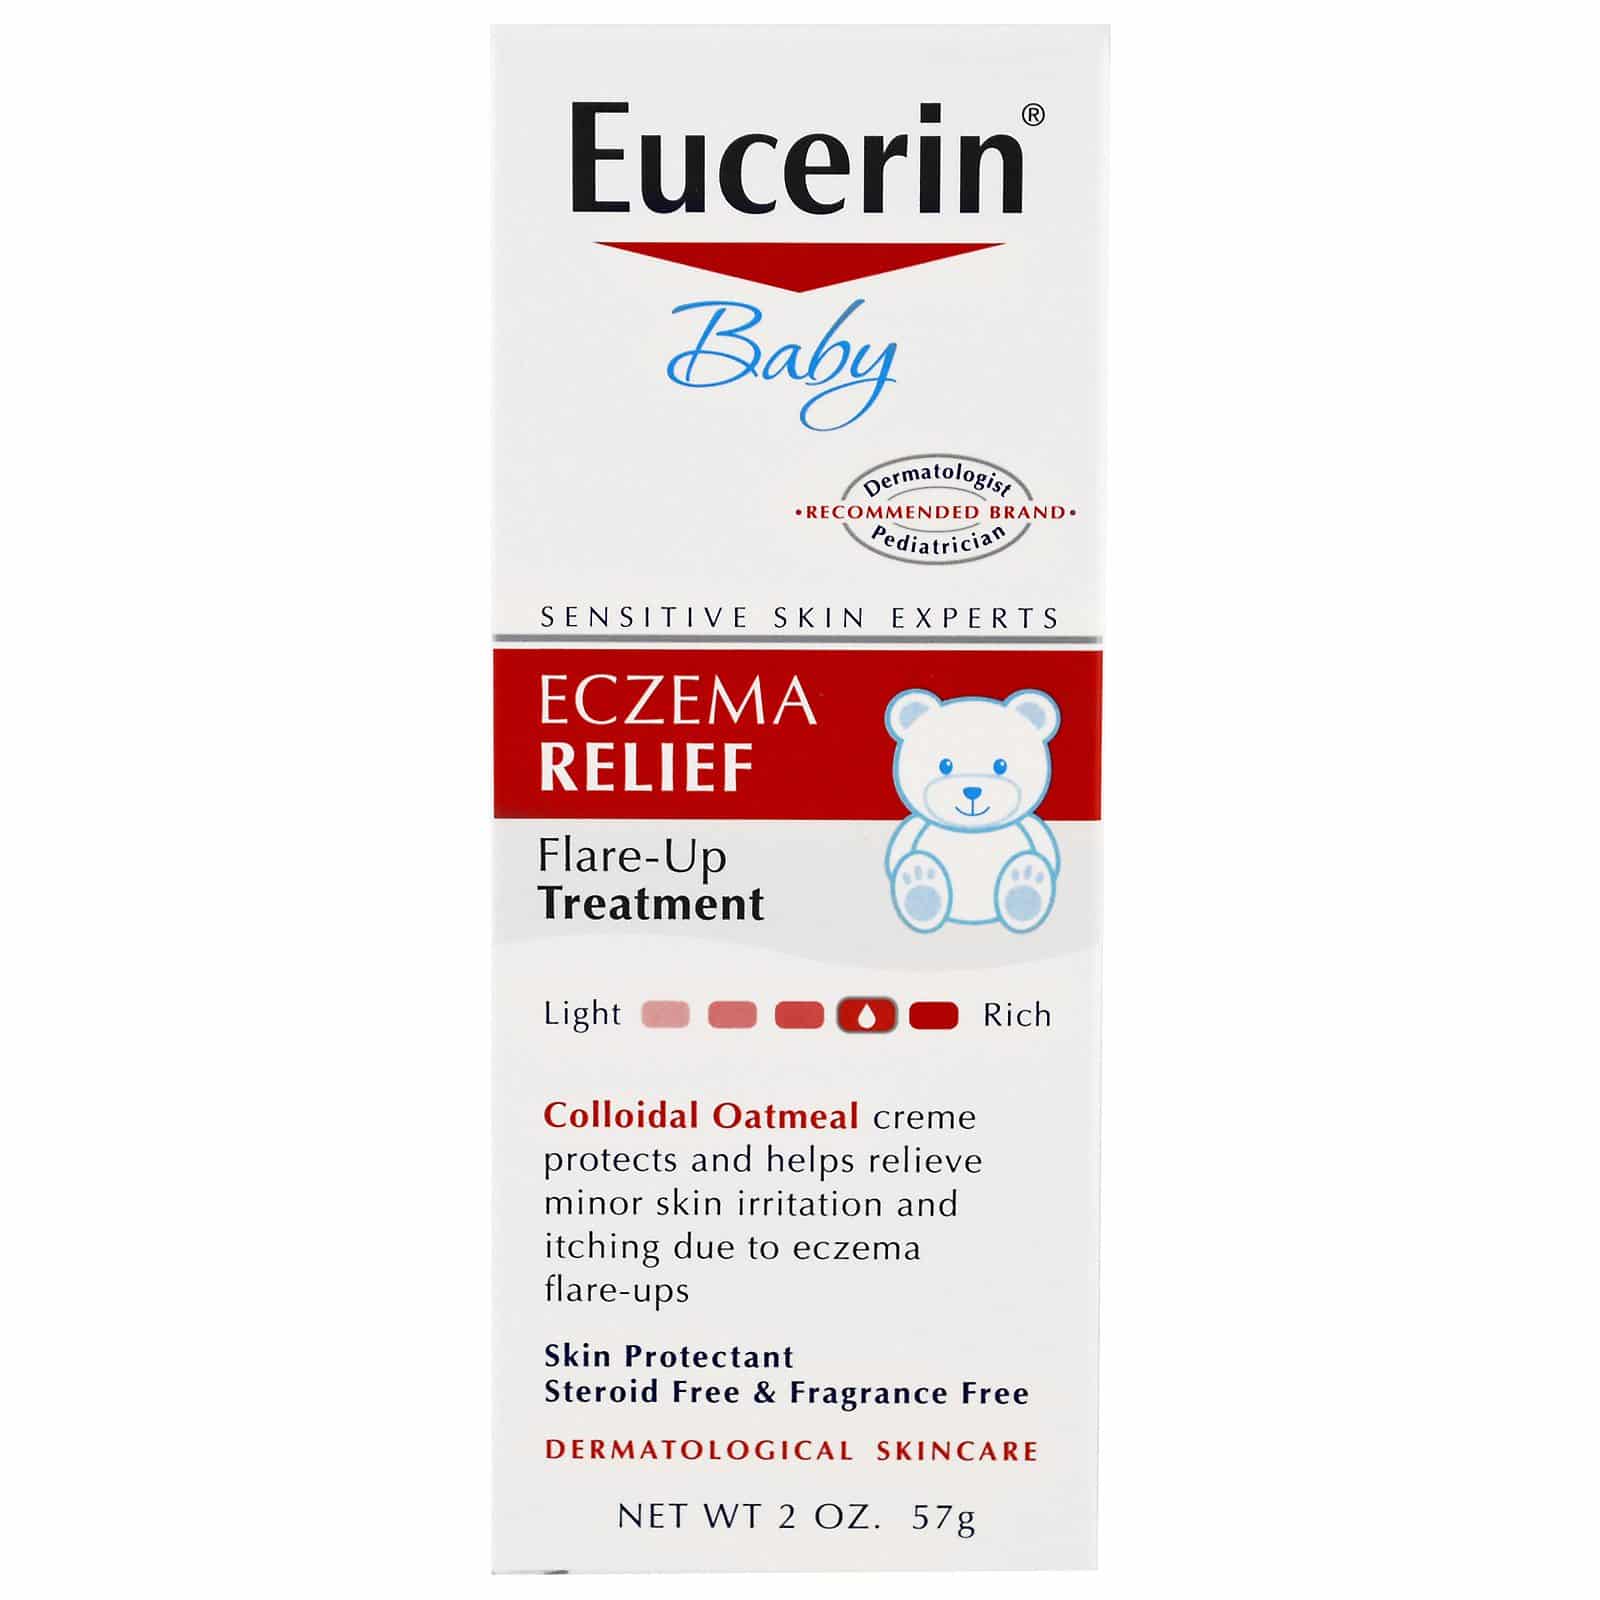 [Clearance Exp. 02/22] Eucerin Baby Eczema Relief Flare